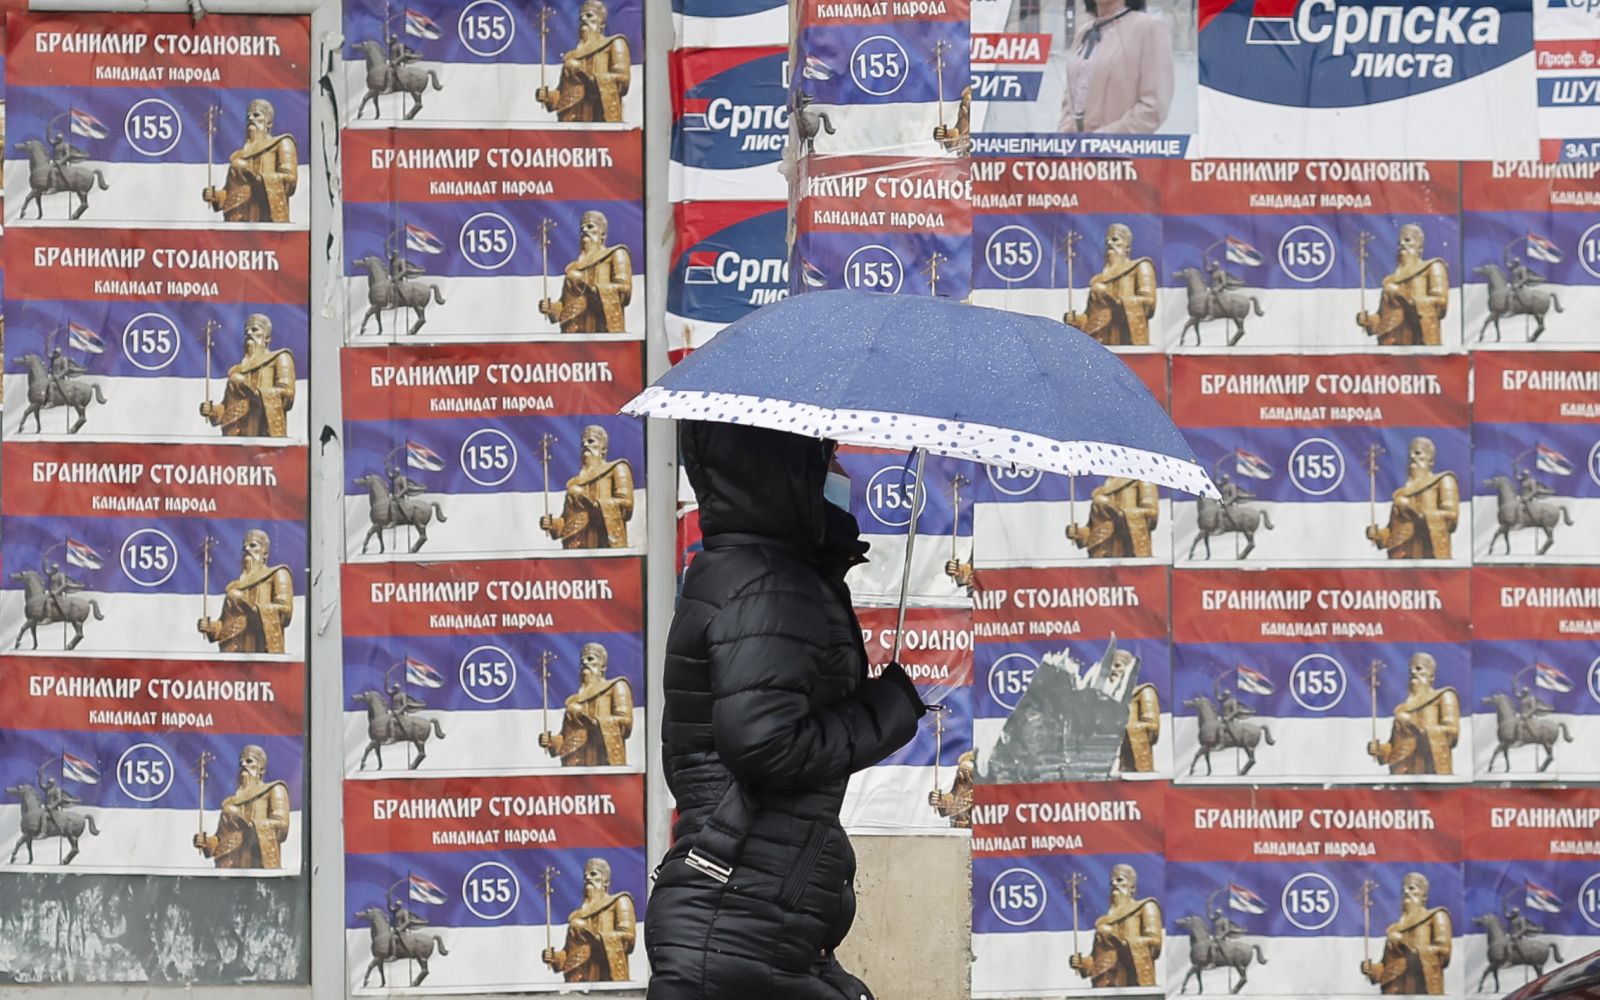 epa09525979 A woman walks in front of the electoral posters in Gracanica, Kosovo, 15 October 2021. Citizens of Kosovo will vote on their local elections on 17 October 2021.  EPA/VALDRIN XHEMAJ